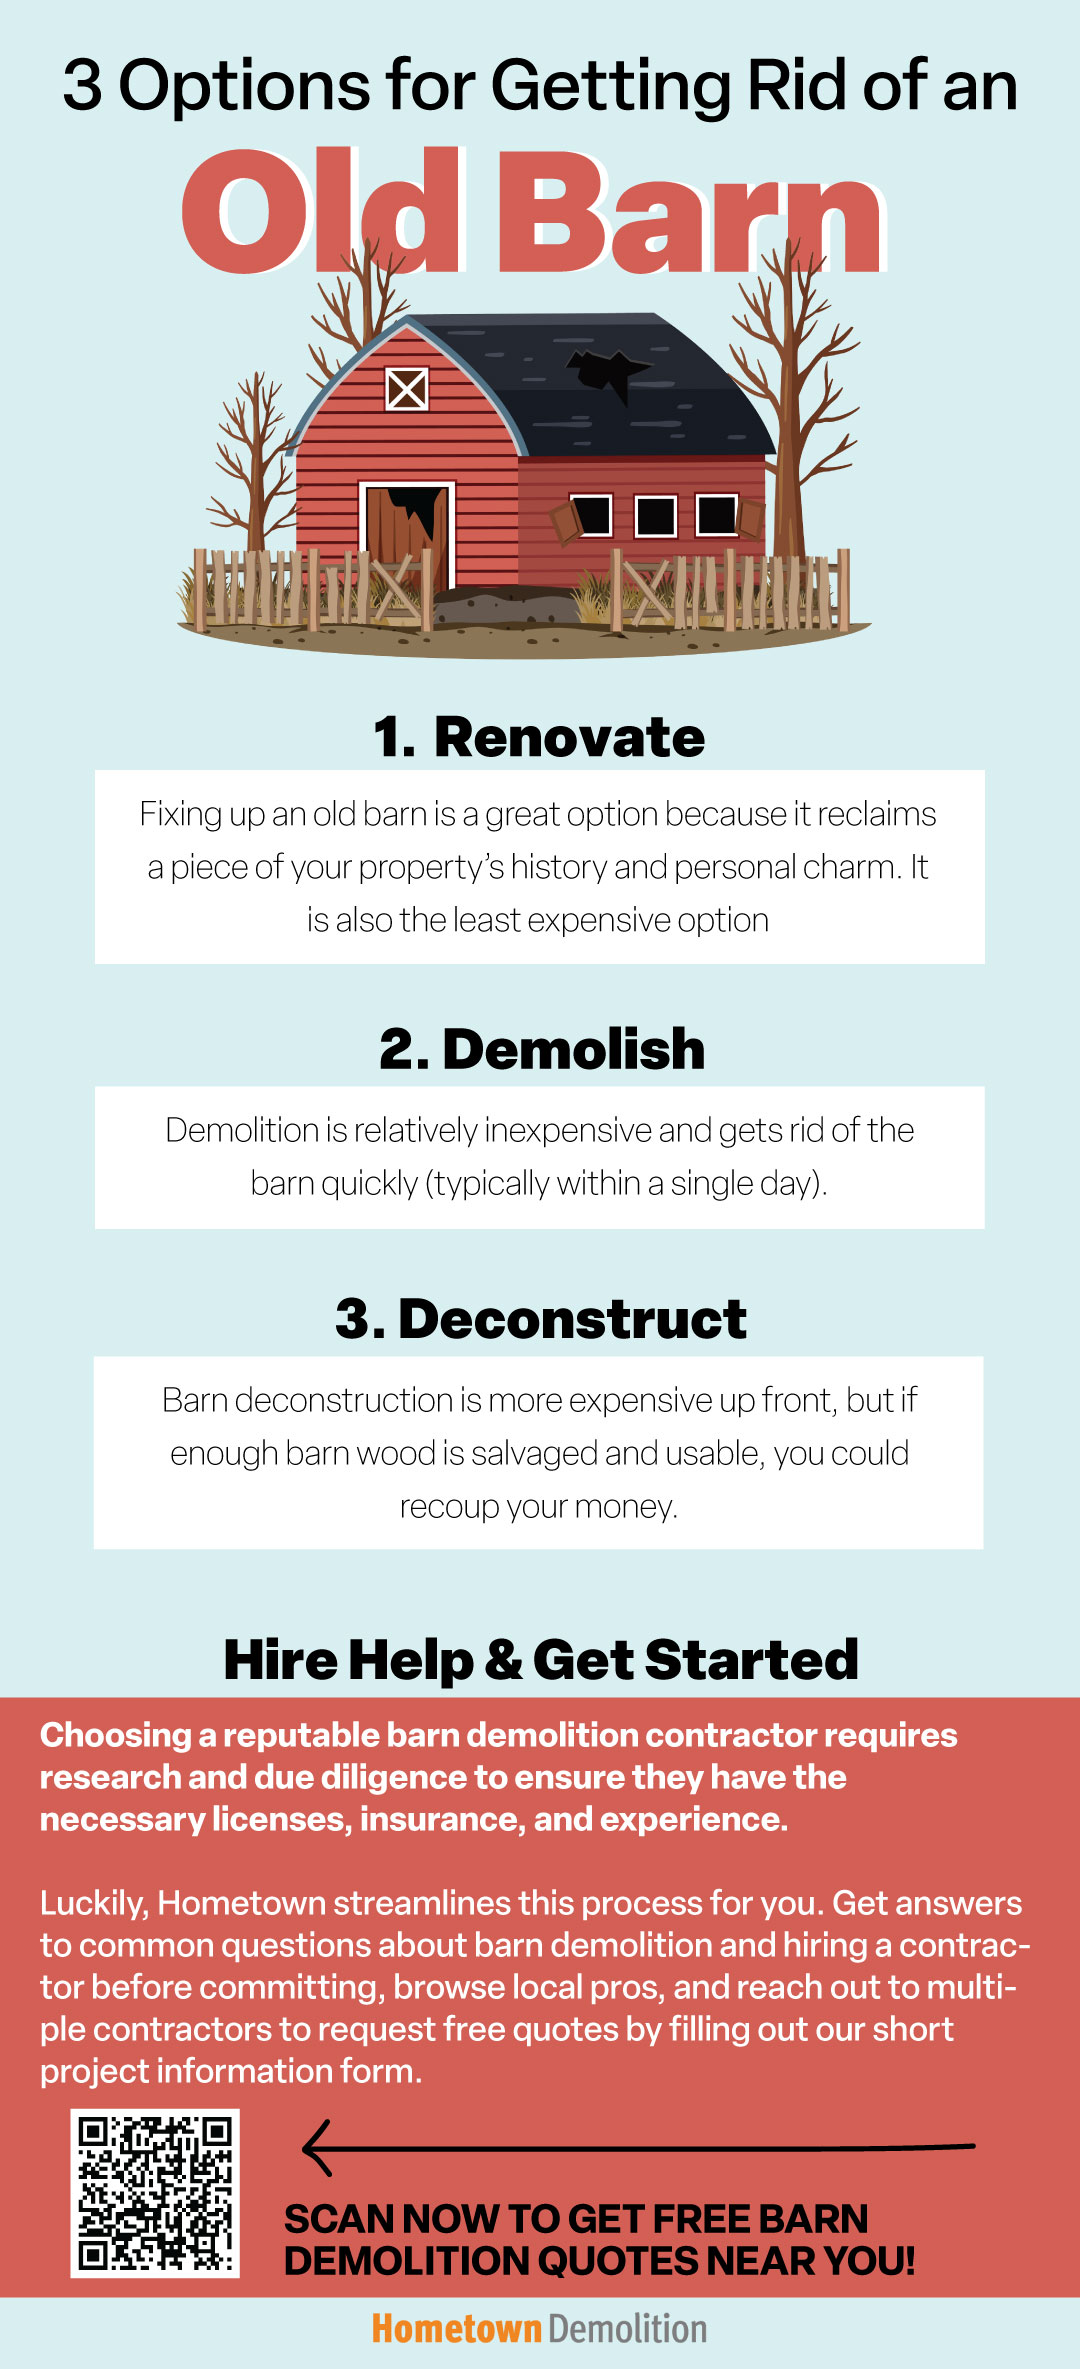 3 Options for Getting Rid of an Old Barn Infographic